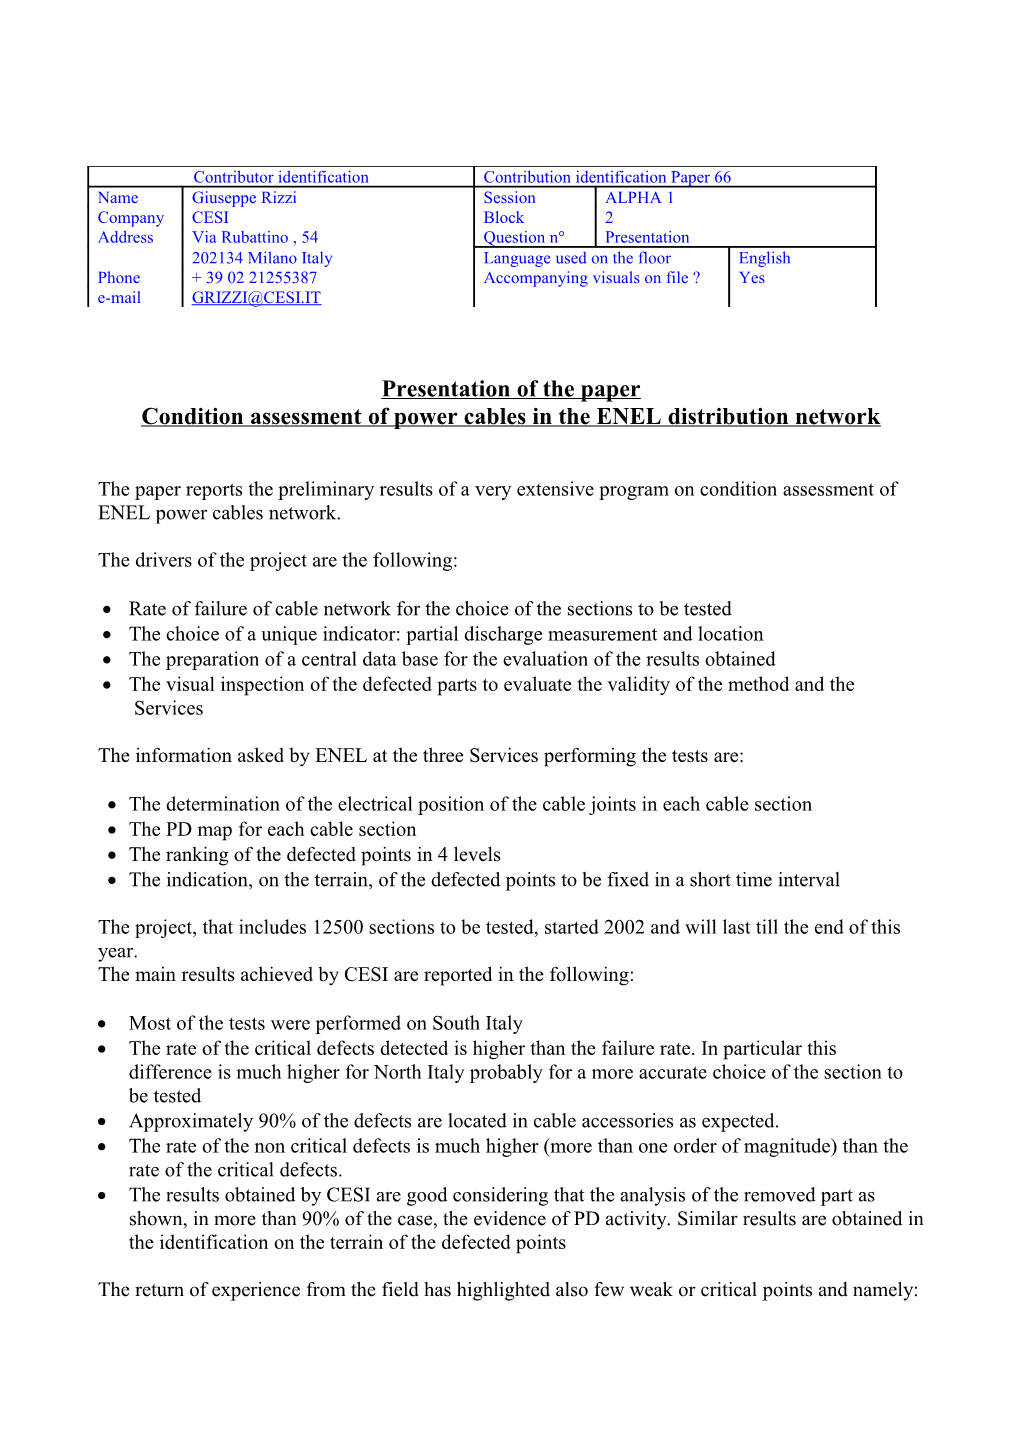 Condition Assessment of Power Cables in the ENEL Distribution Network